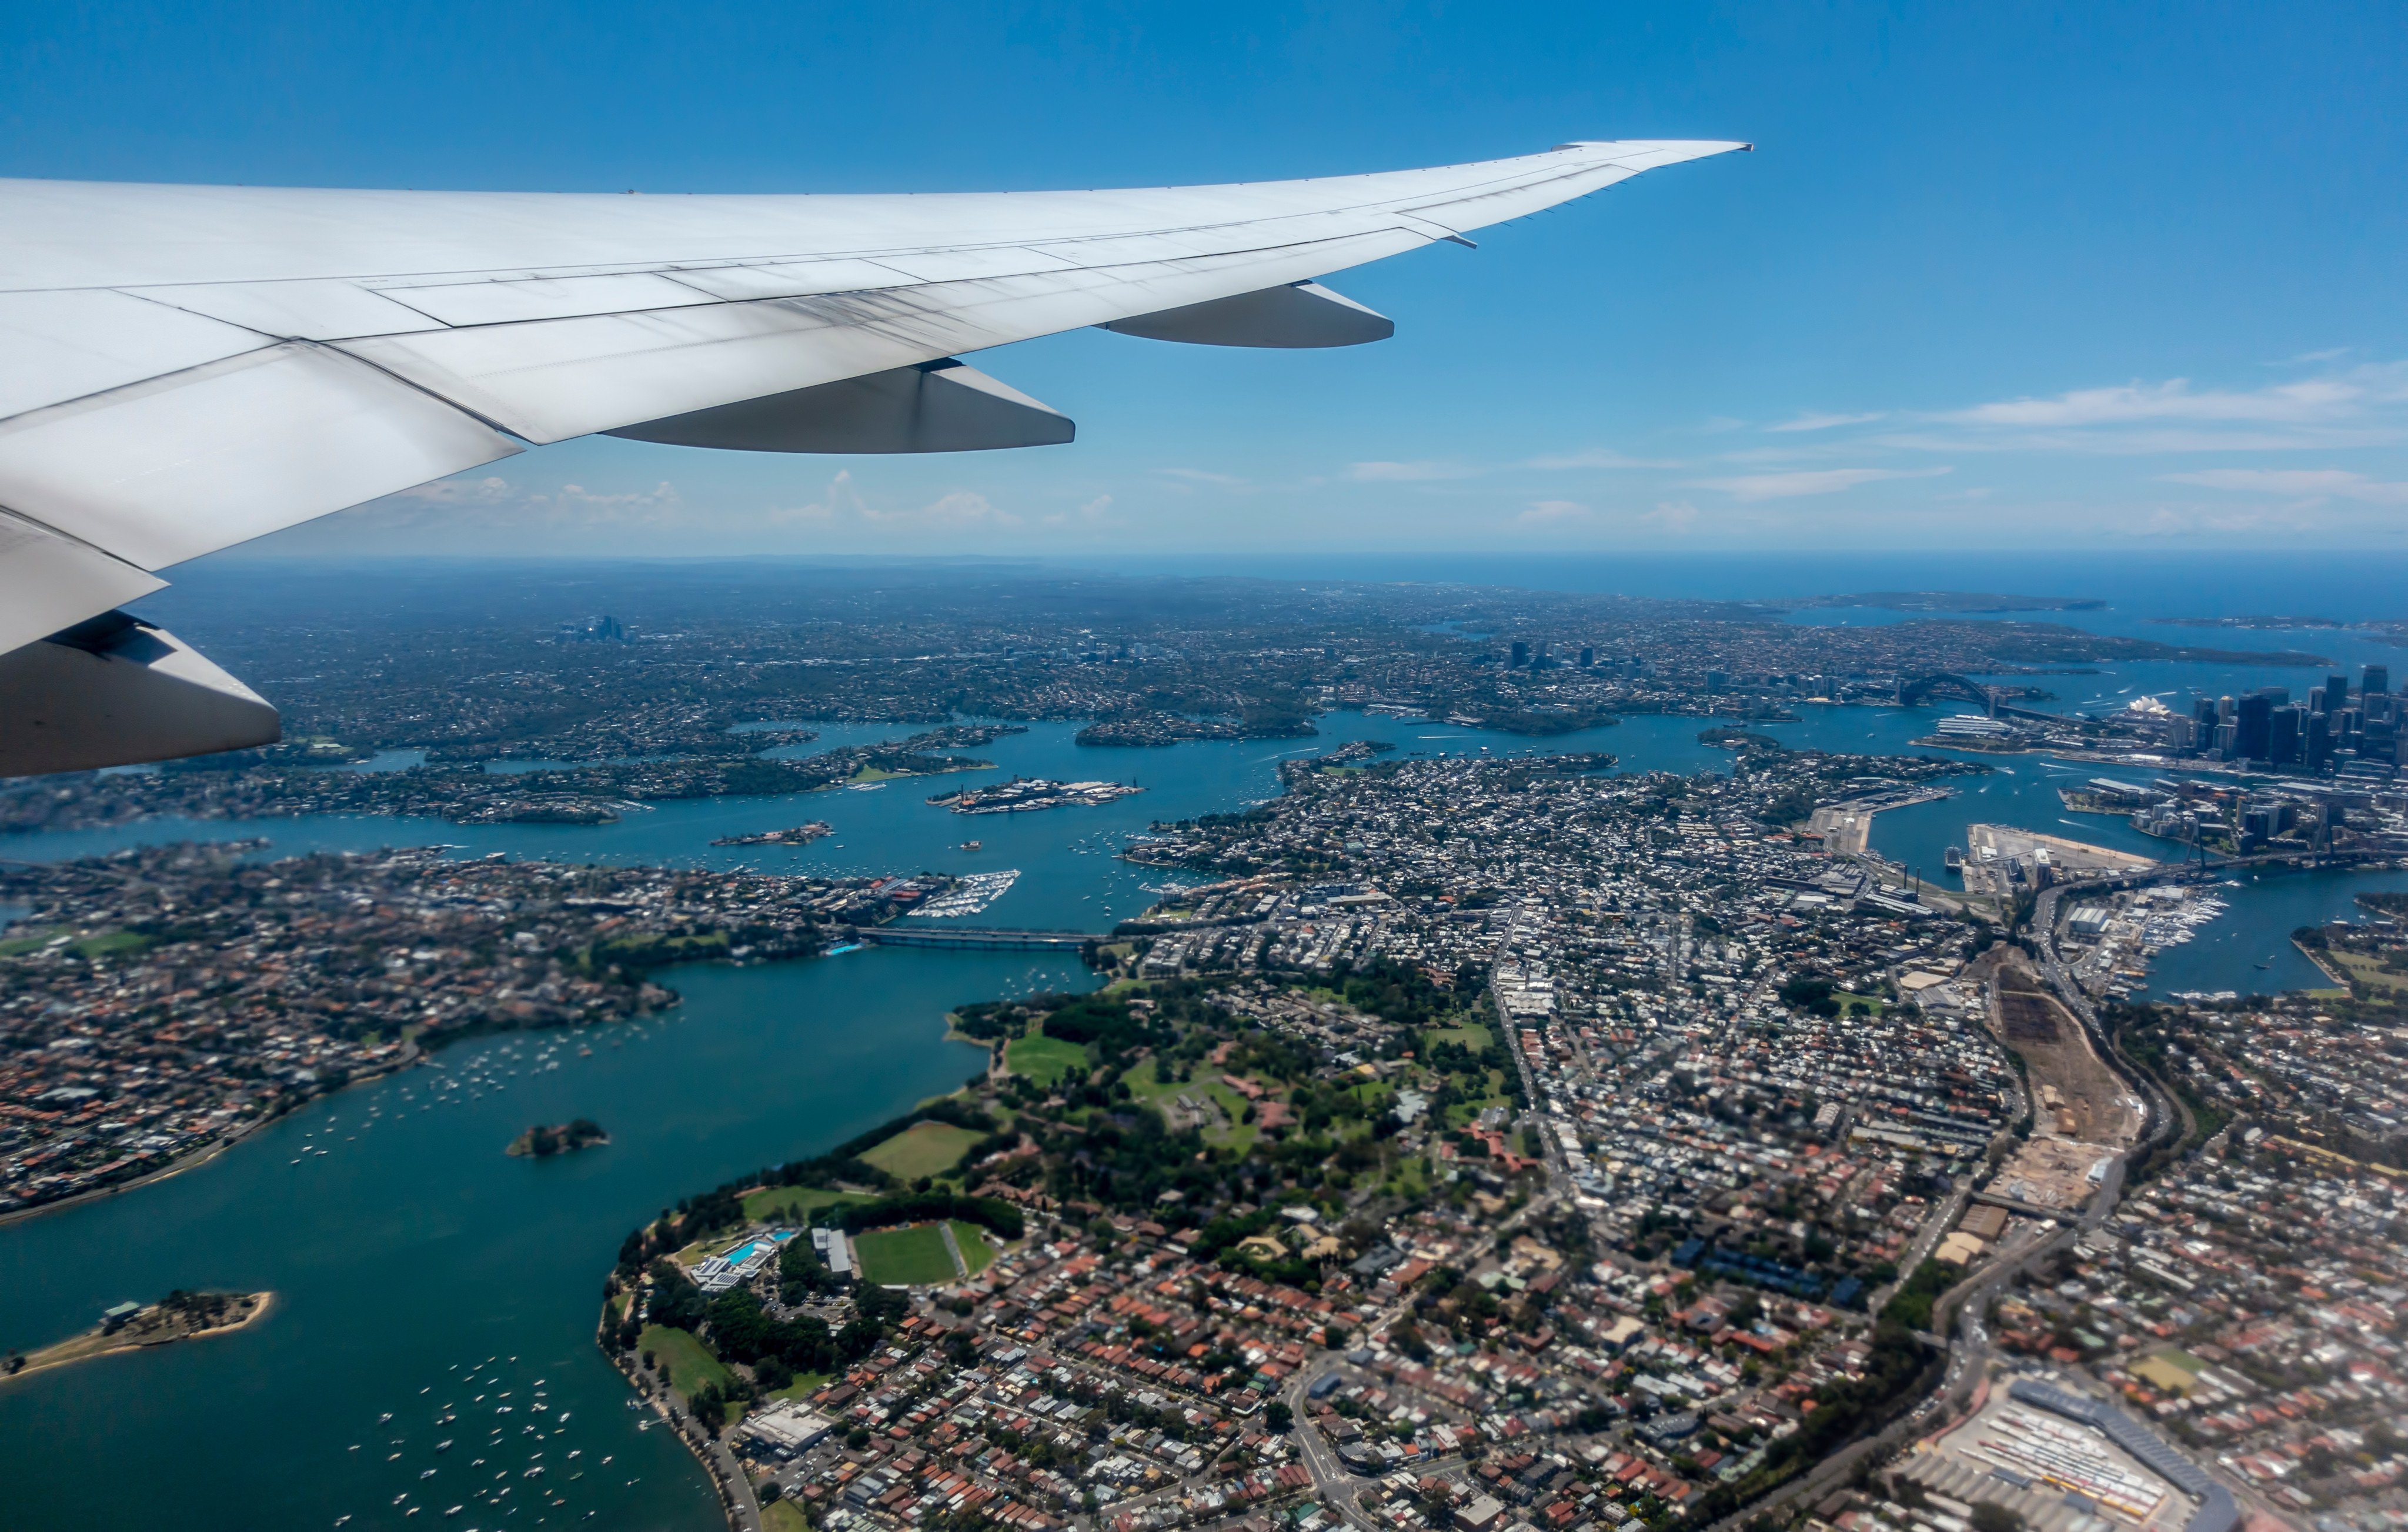 Sydney Harbour seen from a flight newly taken off from Sydney for Los Angeles. Rising airfares, the carbon cost of long-haul travel and the prospect of fewer flights and even higher fares are headwinds for the travel industry in Australia and New Zealand. Photo: Shutterstock